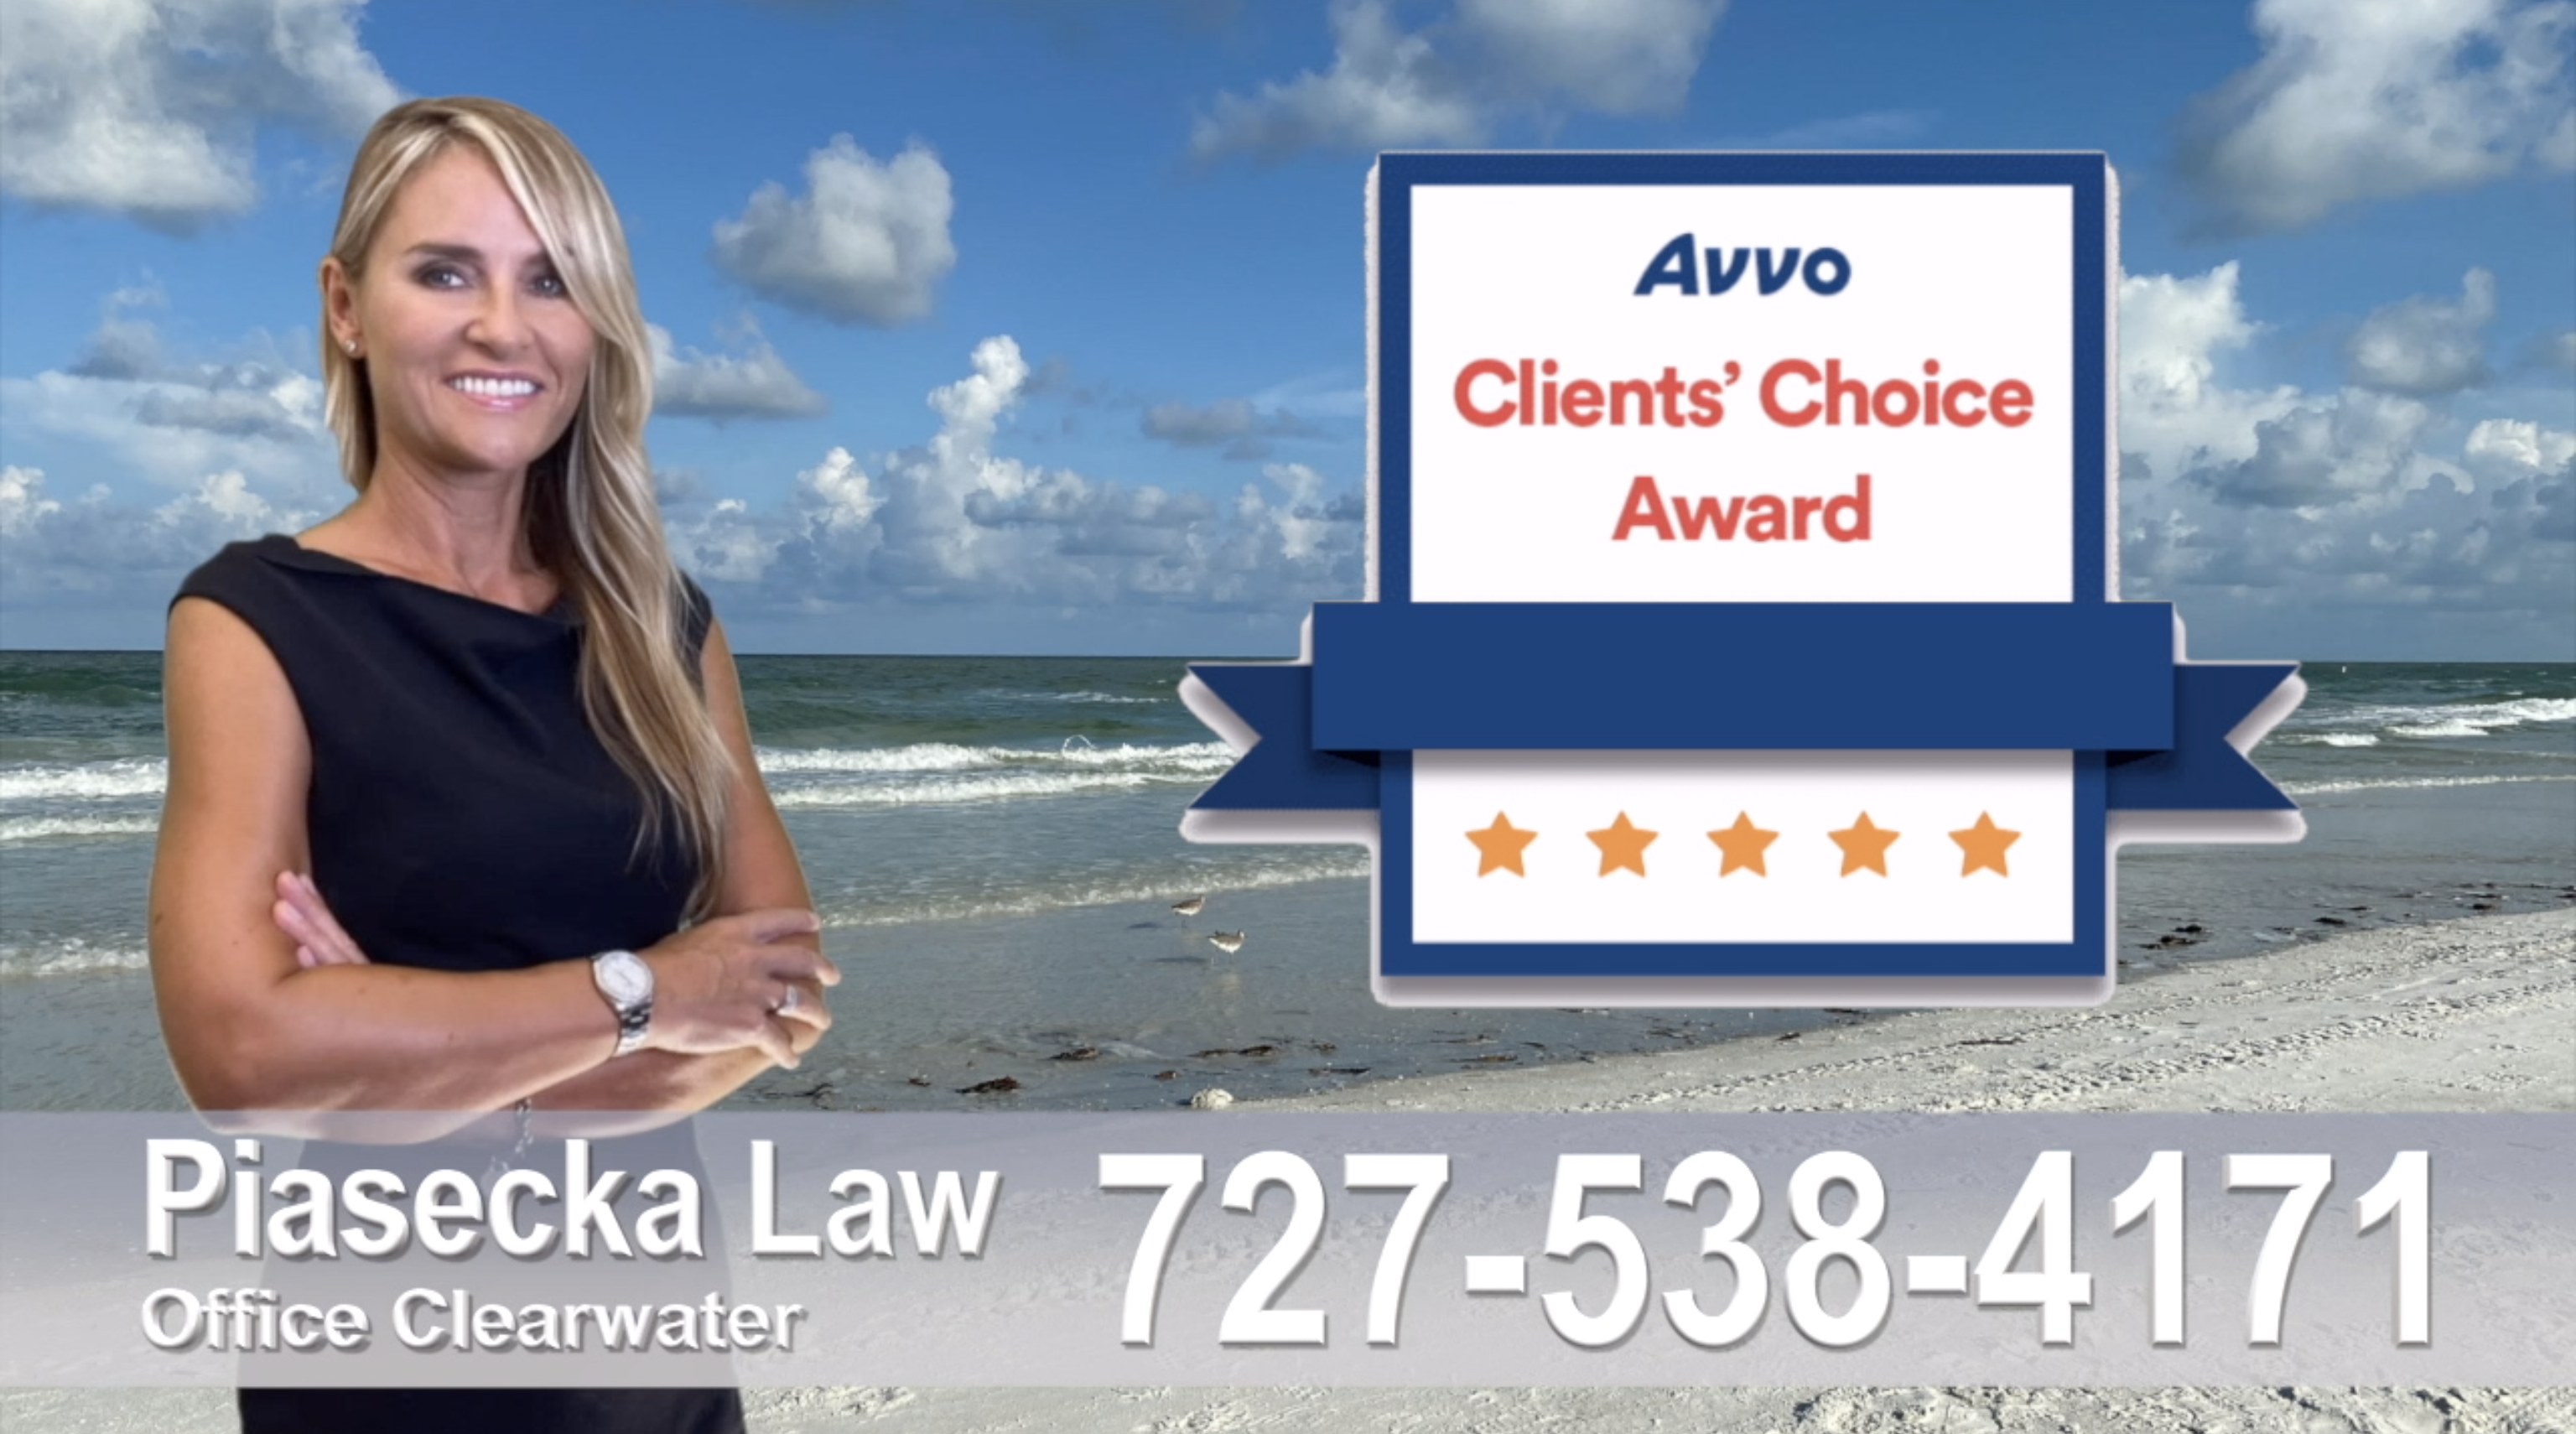 Immigration attorney, polish, lawyer, clients, reviews, clients avvo award